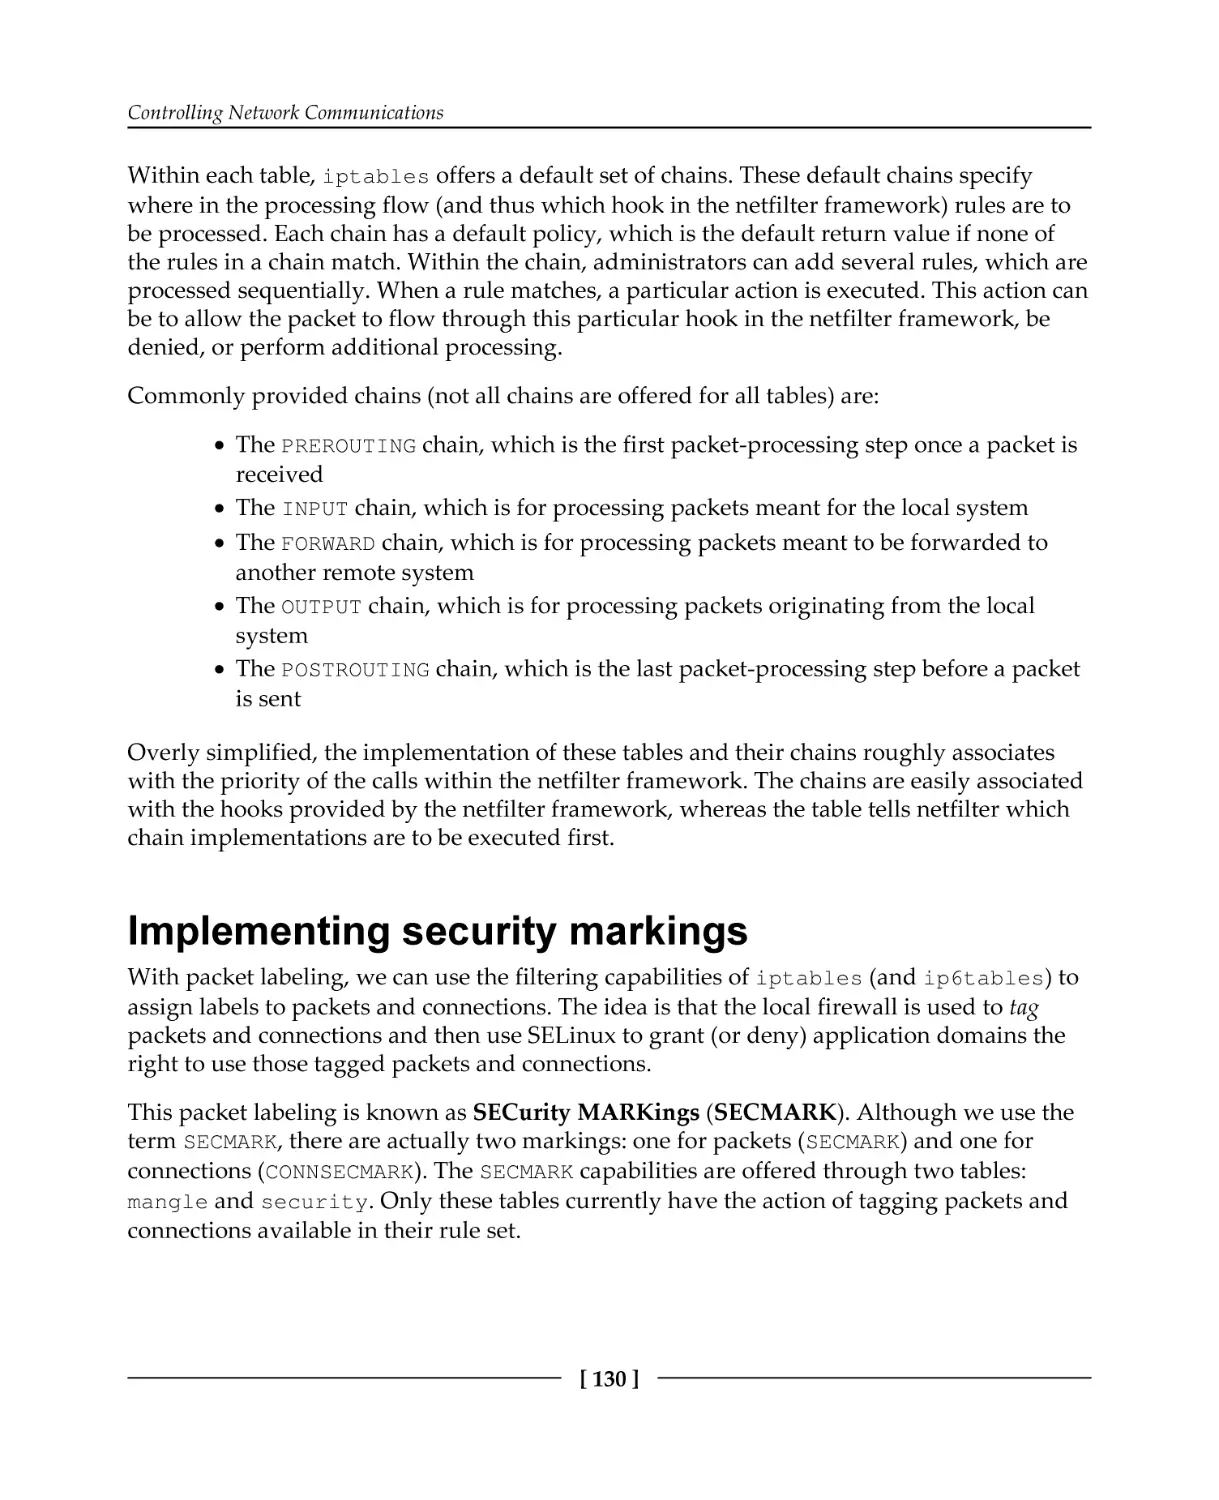 Implementing security markings